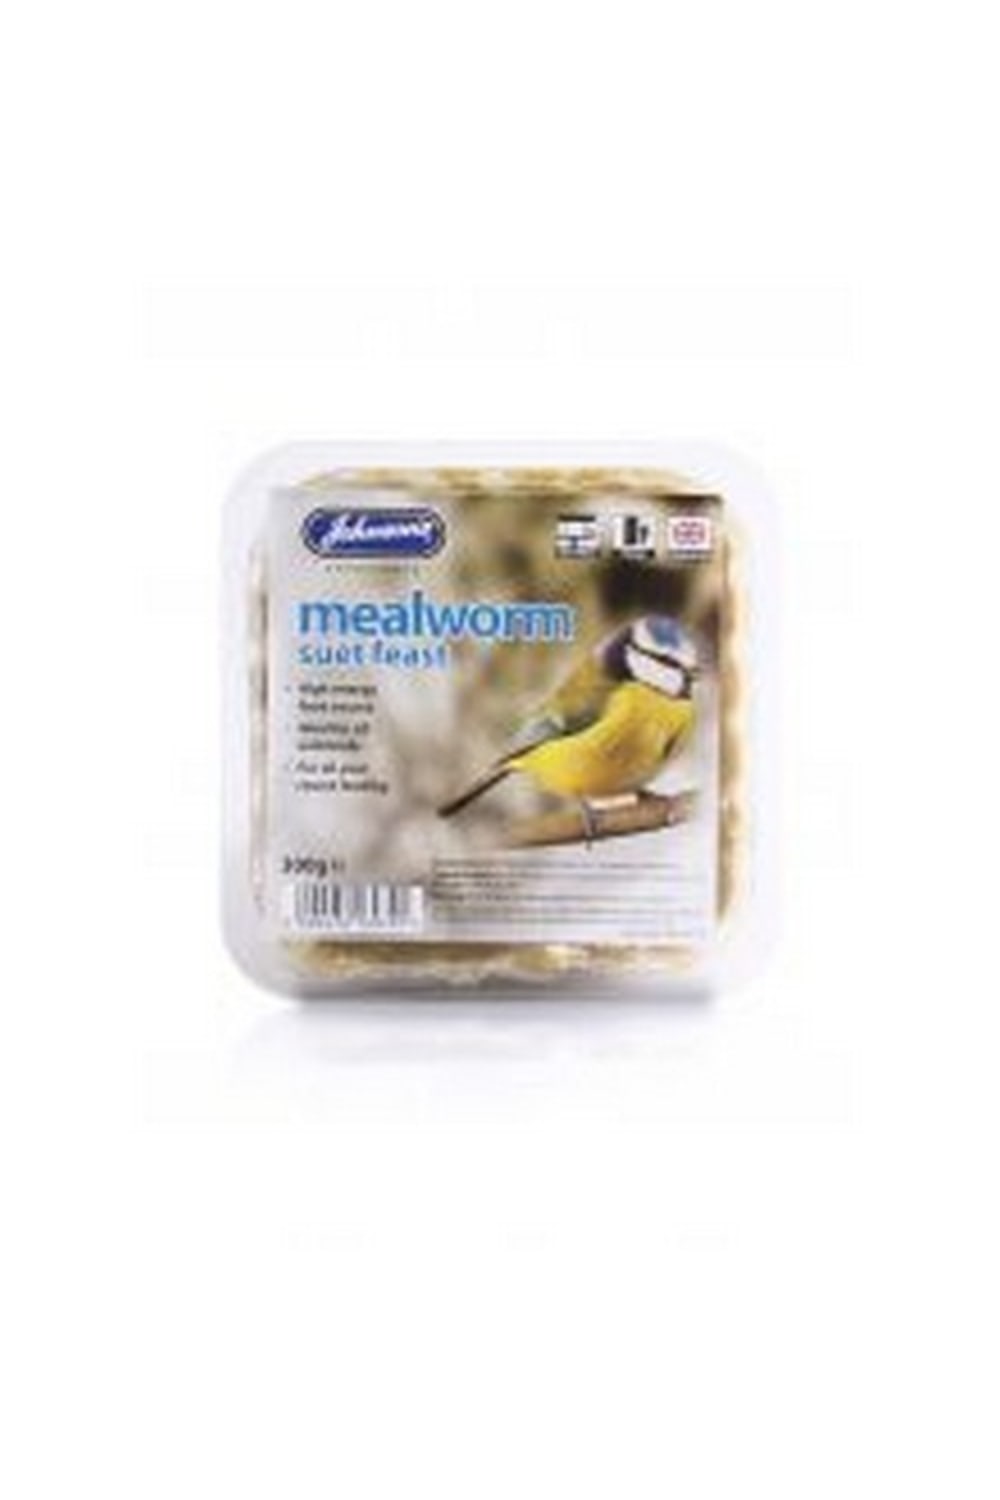 Johnsons Mealworm Suet Feast Bird Feed (May Vary) (One Size)